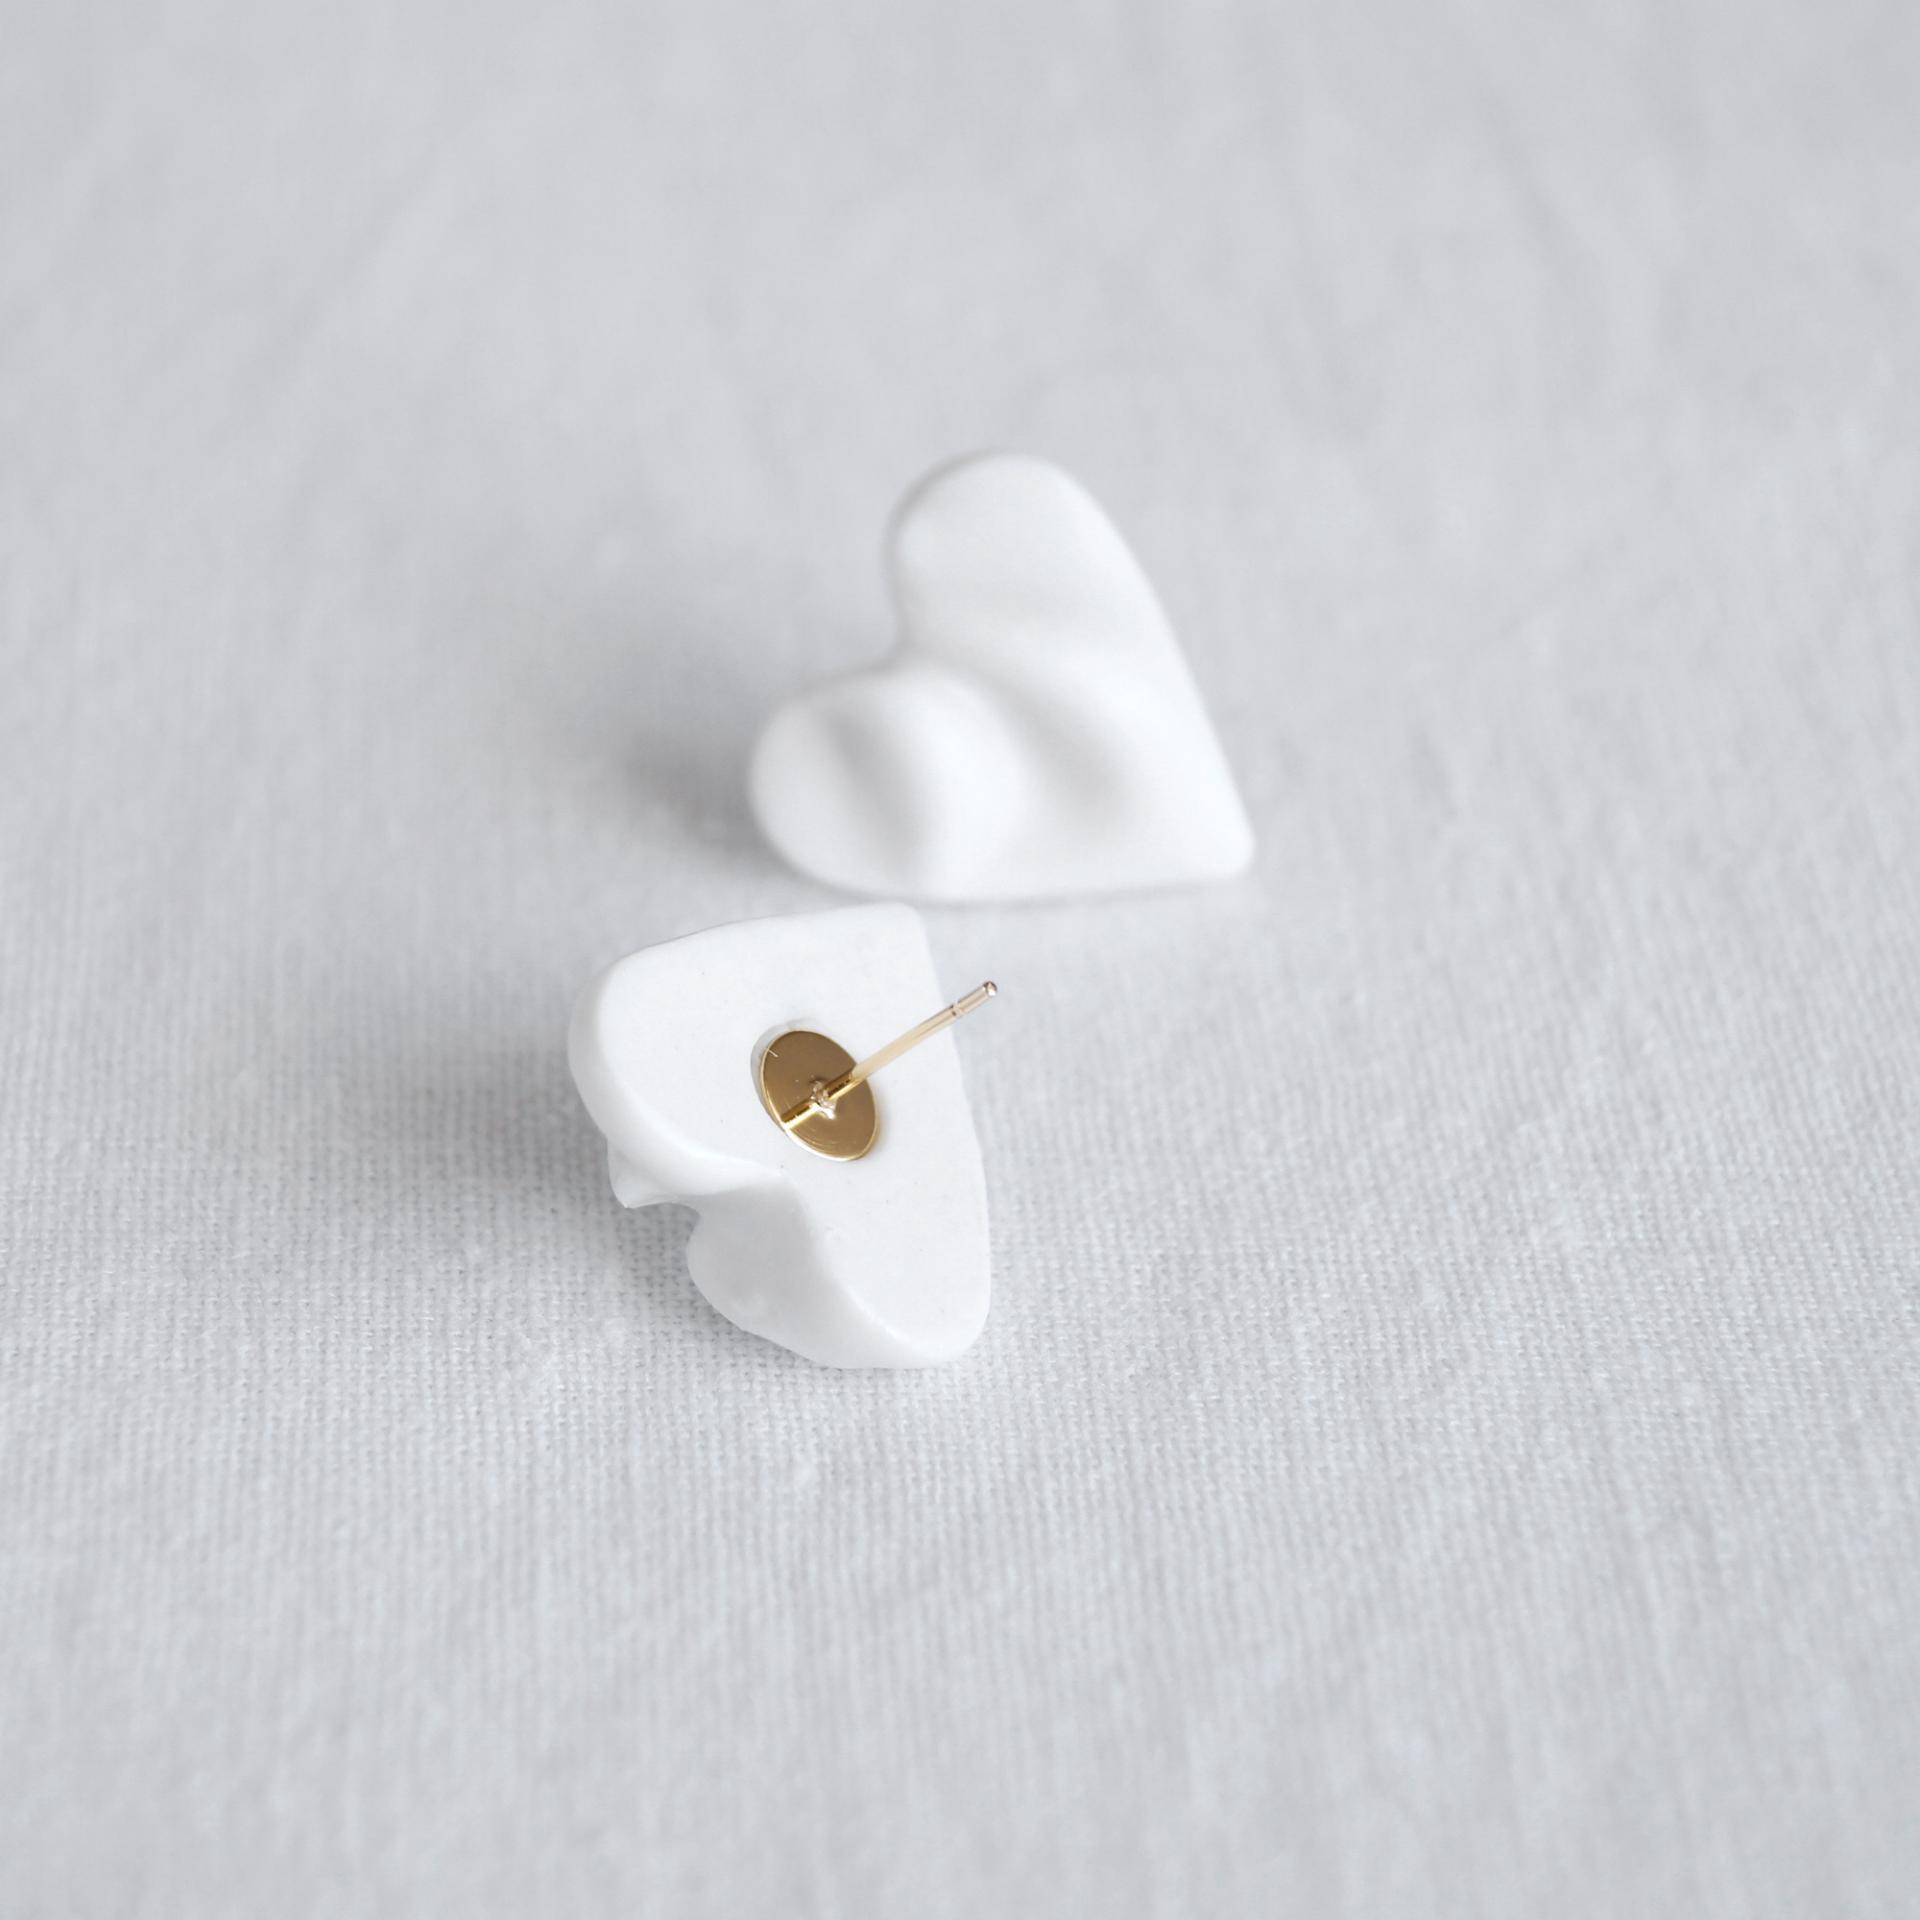 Draped porcelain heart earrings, bride earrings, white satin porcelain, white heart stud earrings, magnet earrings, 925 sterling silver pins, UK, gold, rose gold, 18th wedding anniversary gift for her, 18th anniversary gift for women, 18th anniversary porcelain jewellery, 18th anniversary porcelain earrings, porcelain gift, Valentines day gift, 1st anniversary gift, paper clay gift,